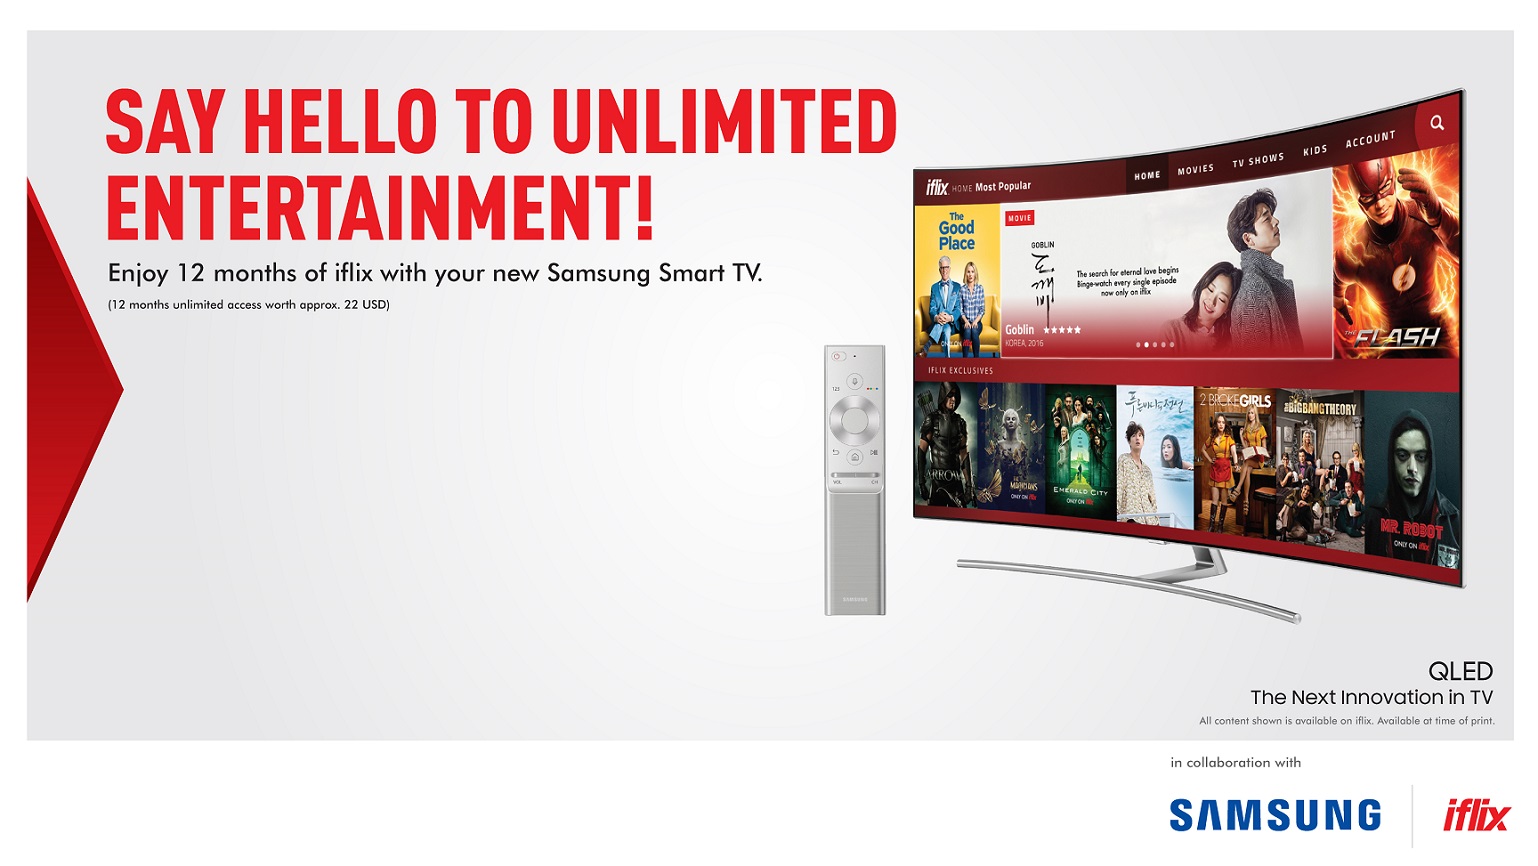 Samsung Southeast Asia &amp; Oceania, iflix team up to enhance TV viewing experience 